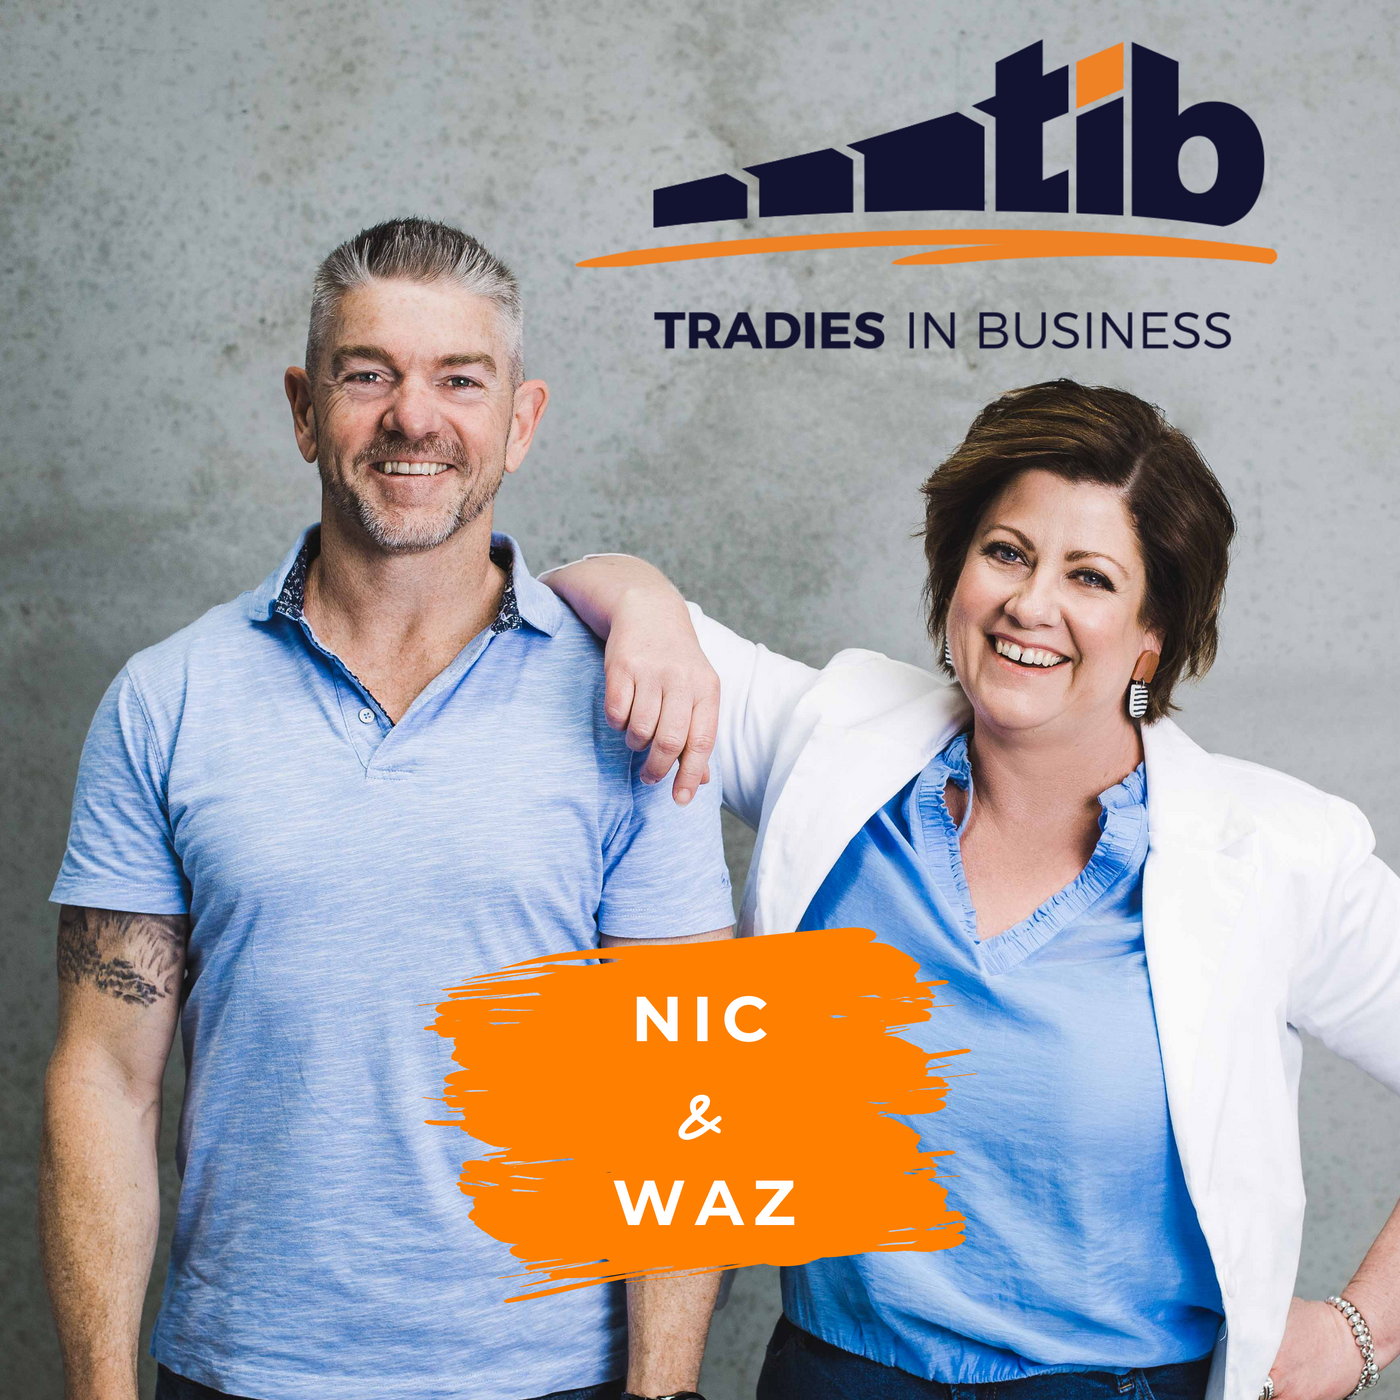 TIB600 CELBRATING 600 EPISODES! Nic and Waz Reflect On The Last 9 Years